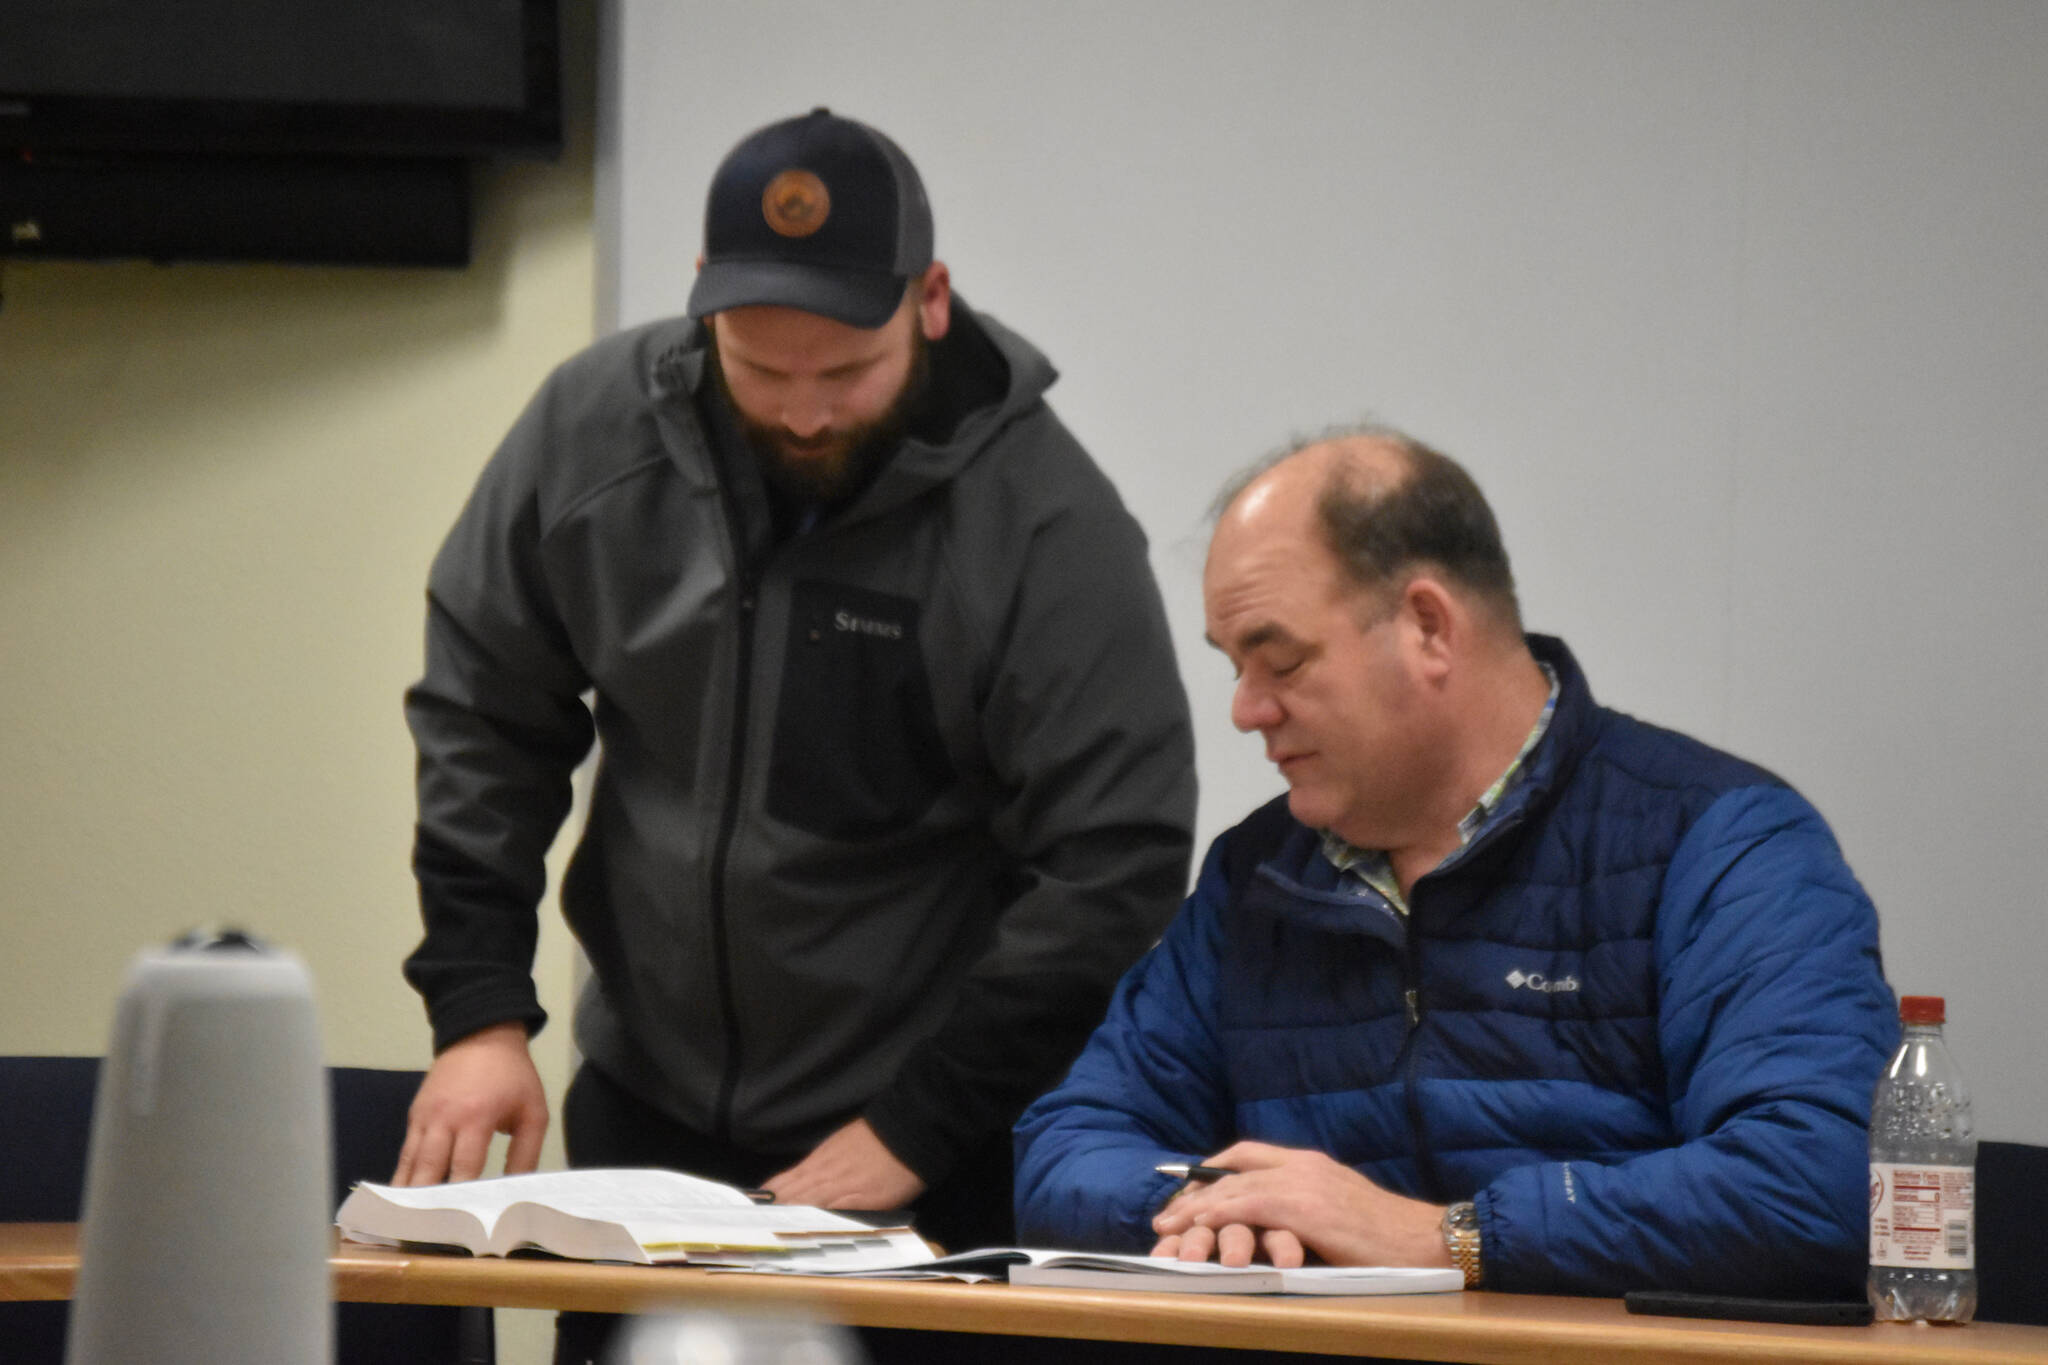 Alaska Department of Fish and Game Northern Kenai Peninsula Area Manager Colton Lipka shares information with Kenai/Soldotna Fish and Game Advisory Council Chair Mike Crawford as the advisory council deliberates their position on a proposal to the Board of Fish during a meeting at Cook Inlet Aquaculture in Kenai, Alaska on Thursday, Feb. 16, 2023. (Jake Dye/Peninsula Clarion)